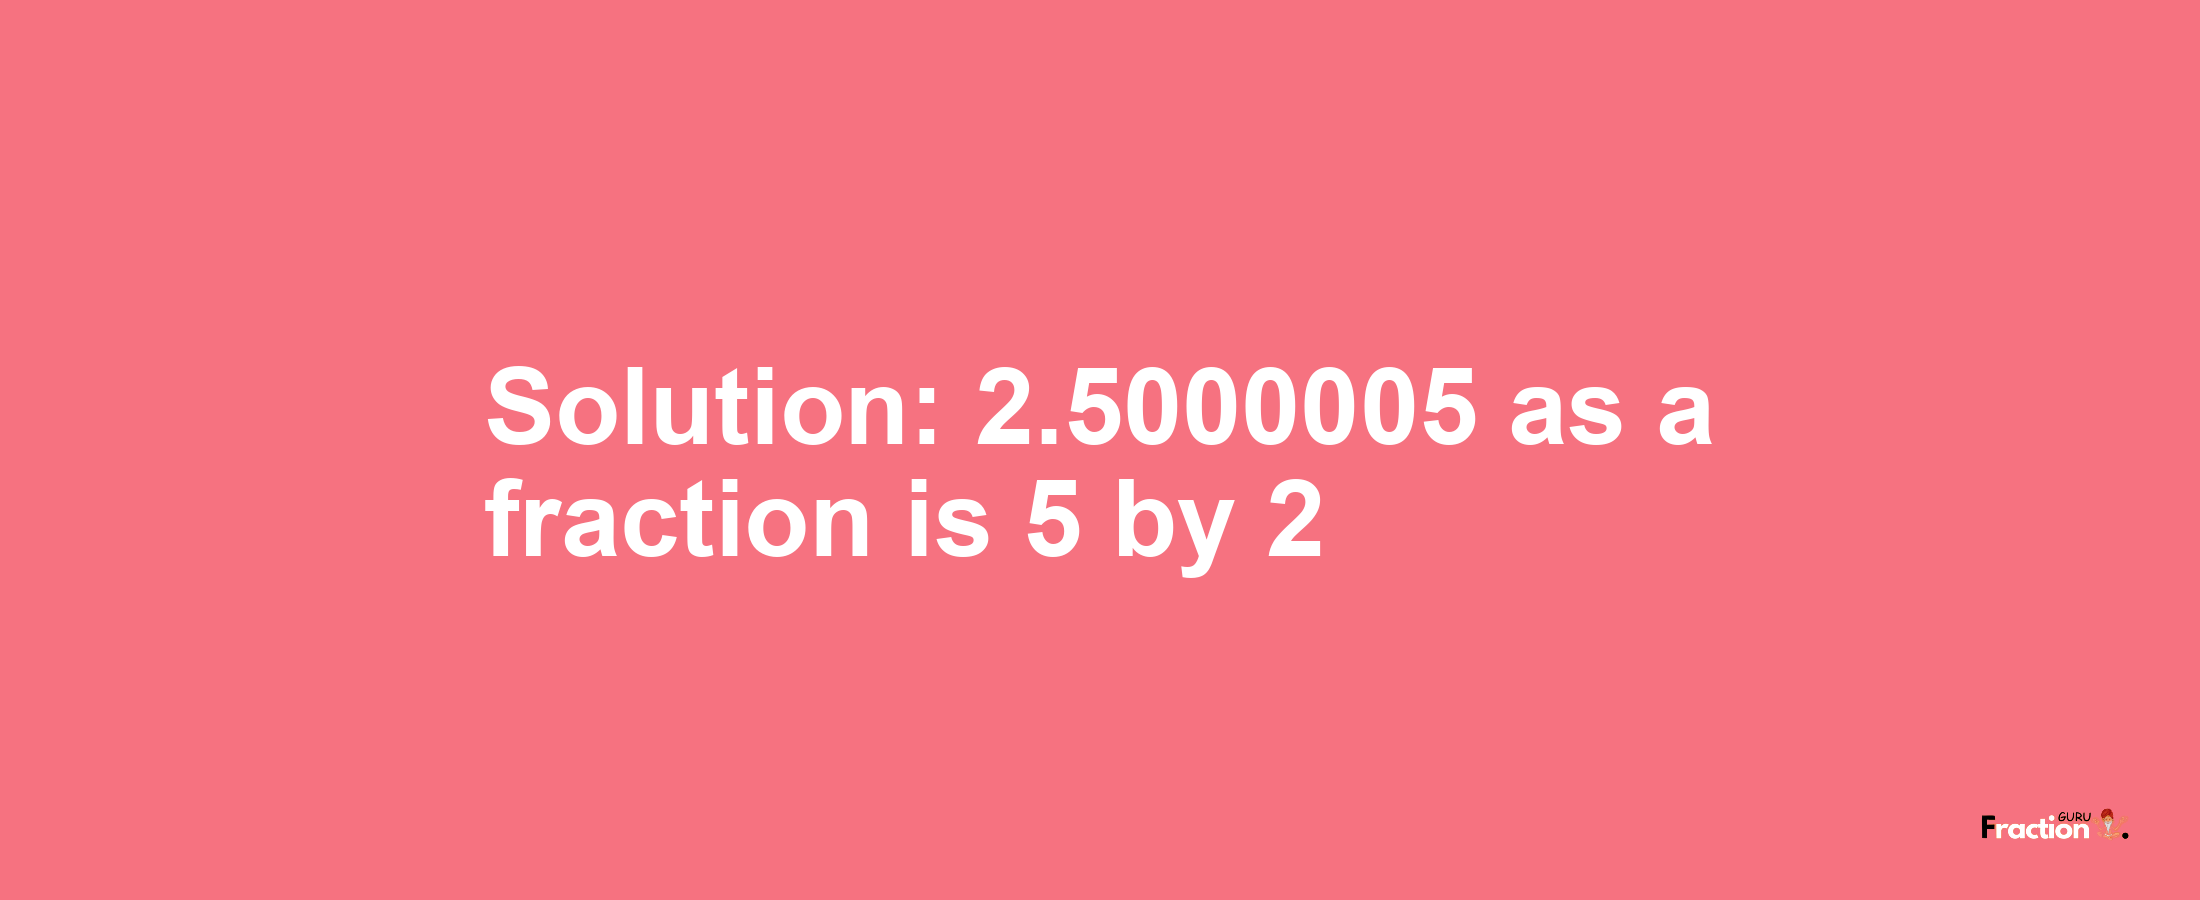 Solution:2.5000005 as a fraction is 5/2